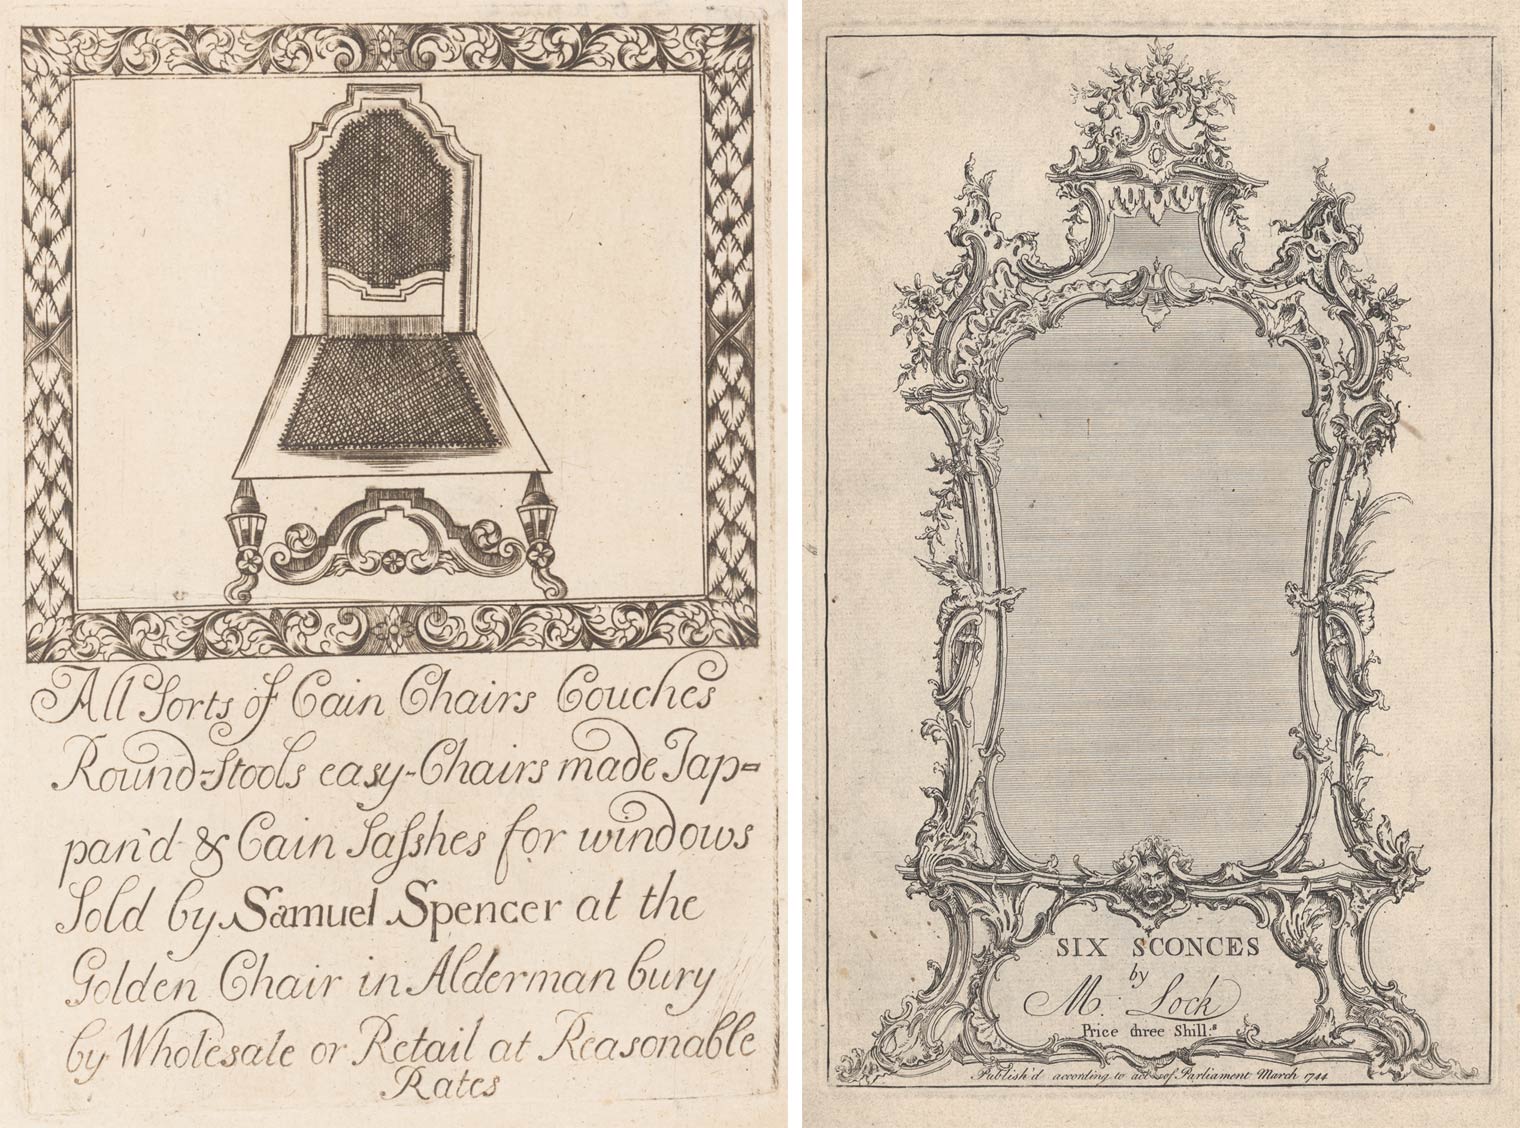 Promotional cards for 18th-century furniture makers Samuel Spencer (left) and Matthias Lock (right)